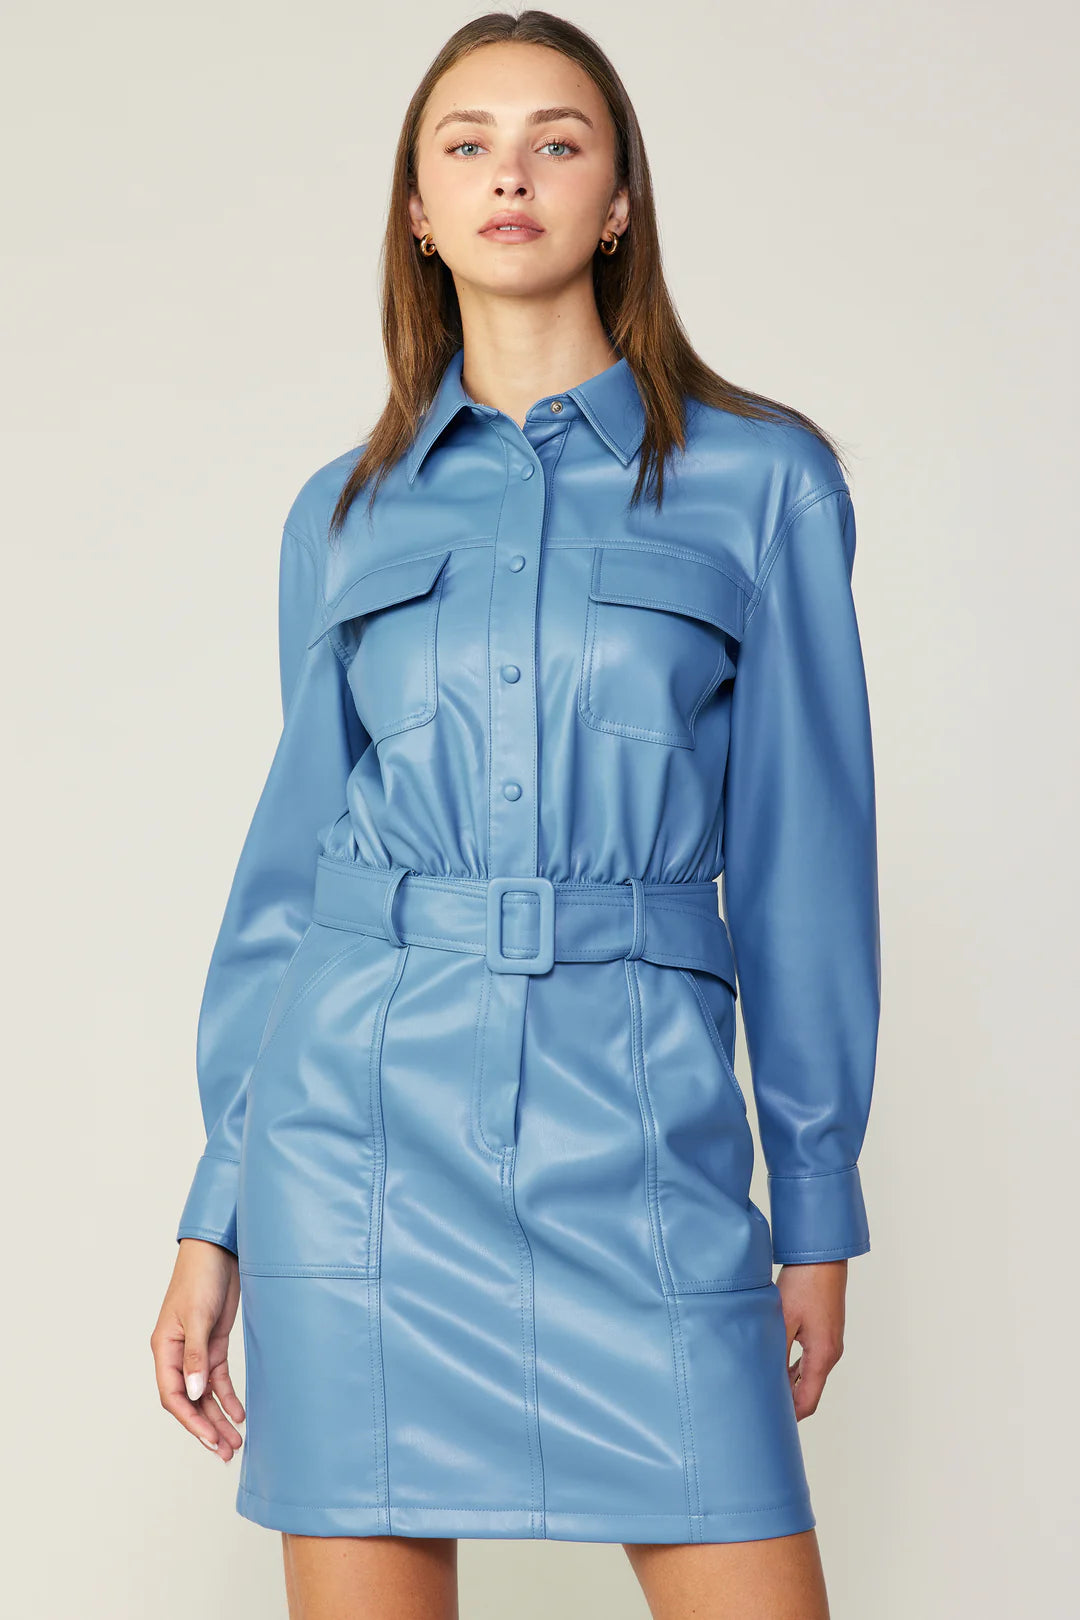 Women's Vegan Leather Wrap Dress by Skies Are Blue